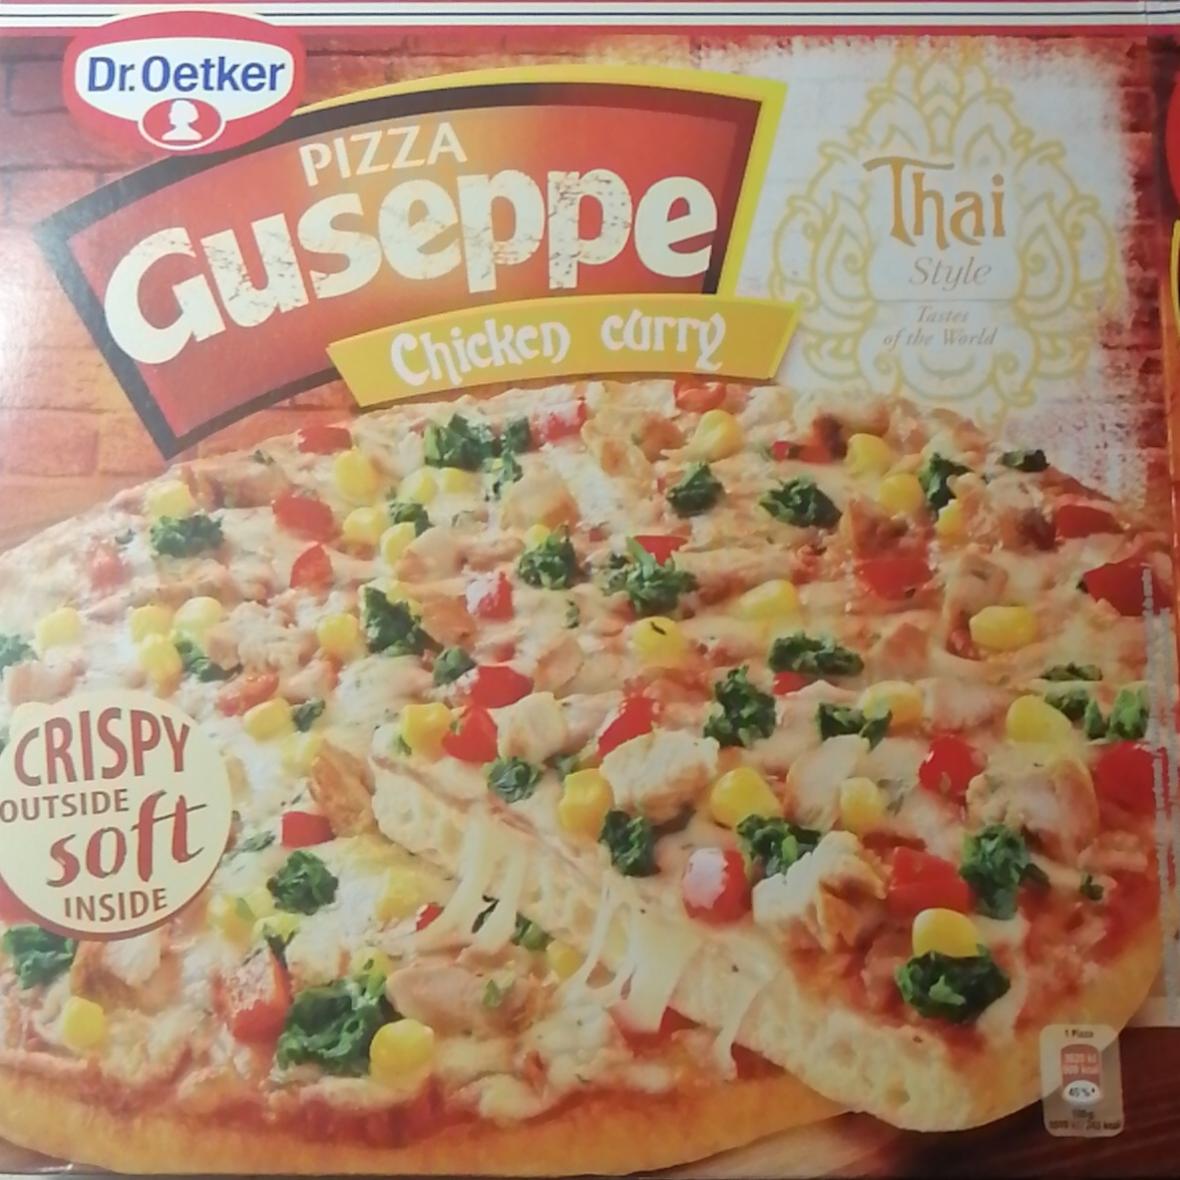 Fotografie - Guseppe pizza Chicken curry Dr.Oetker